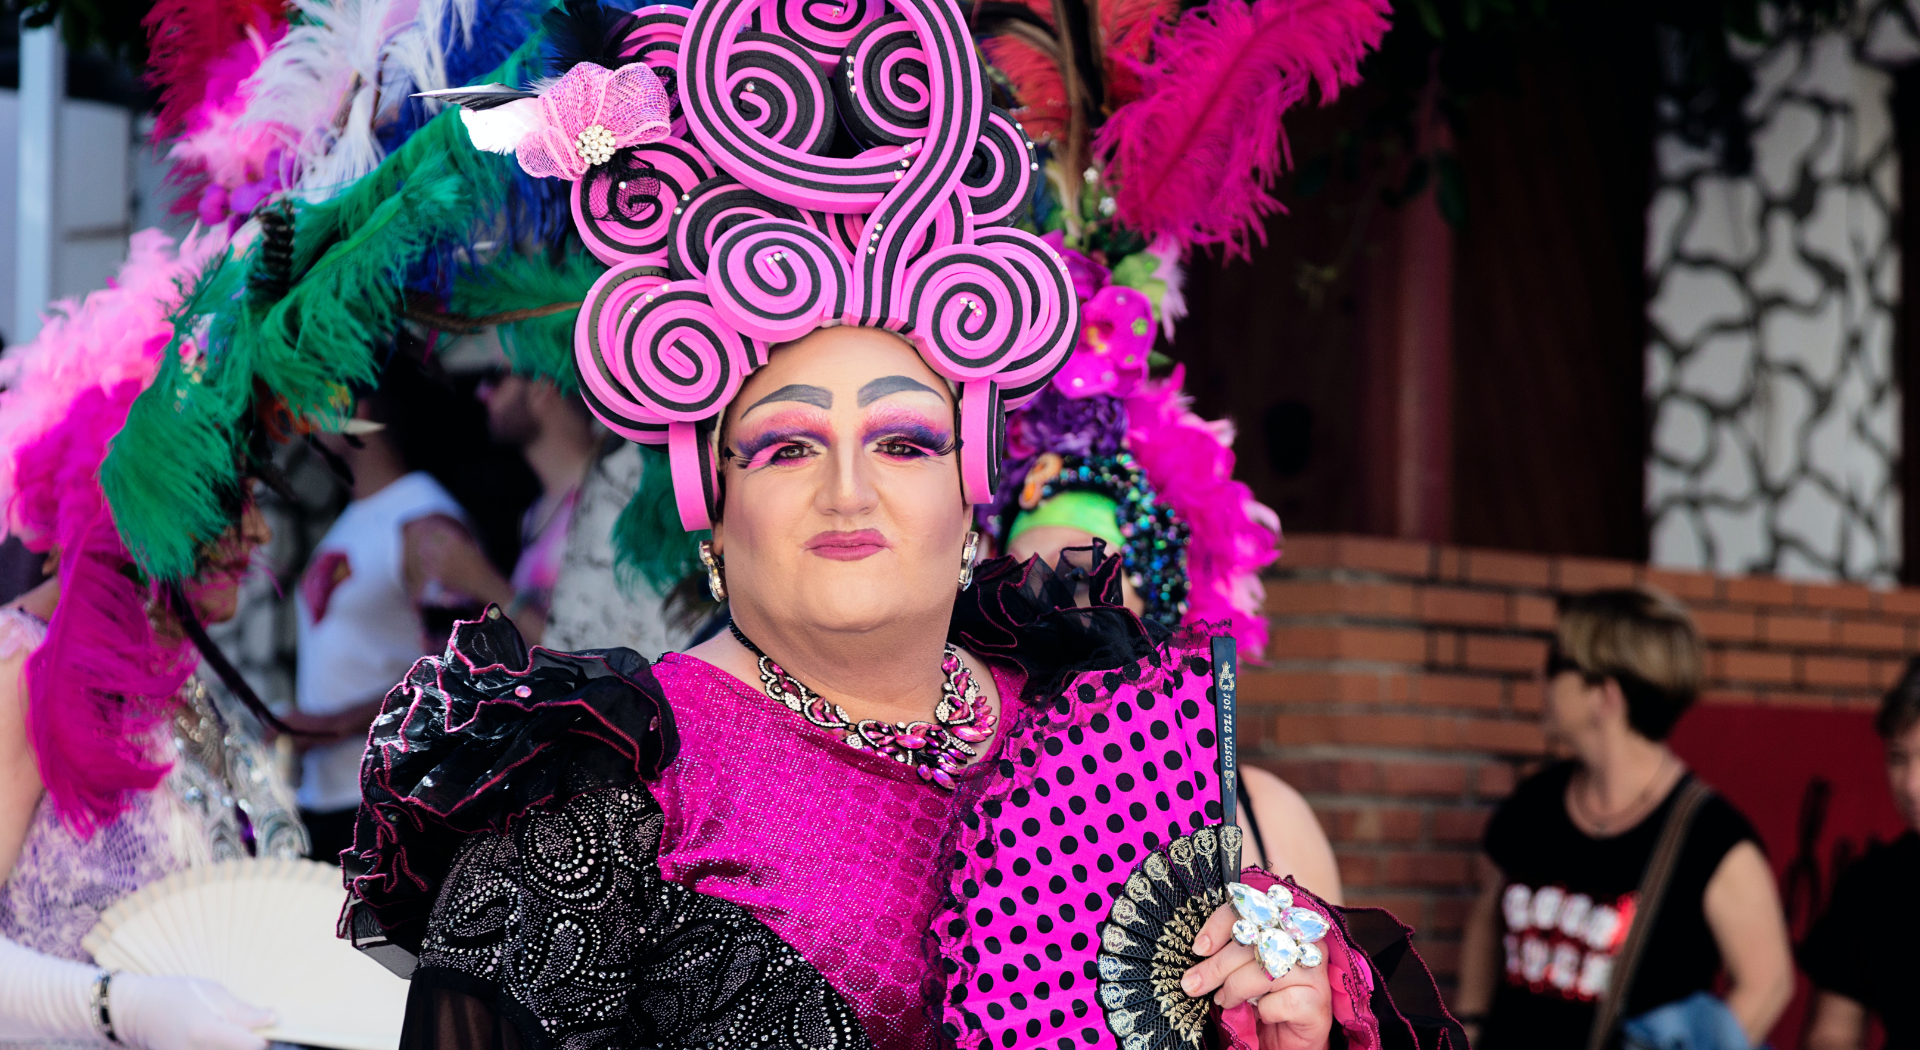 A drag queen dressed in vibrant colours of mostly pink with black polka dots. She is wearing pink eyeshadow and has a pink head piece on top of her head.